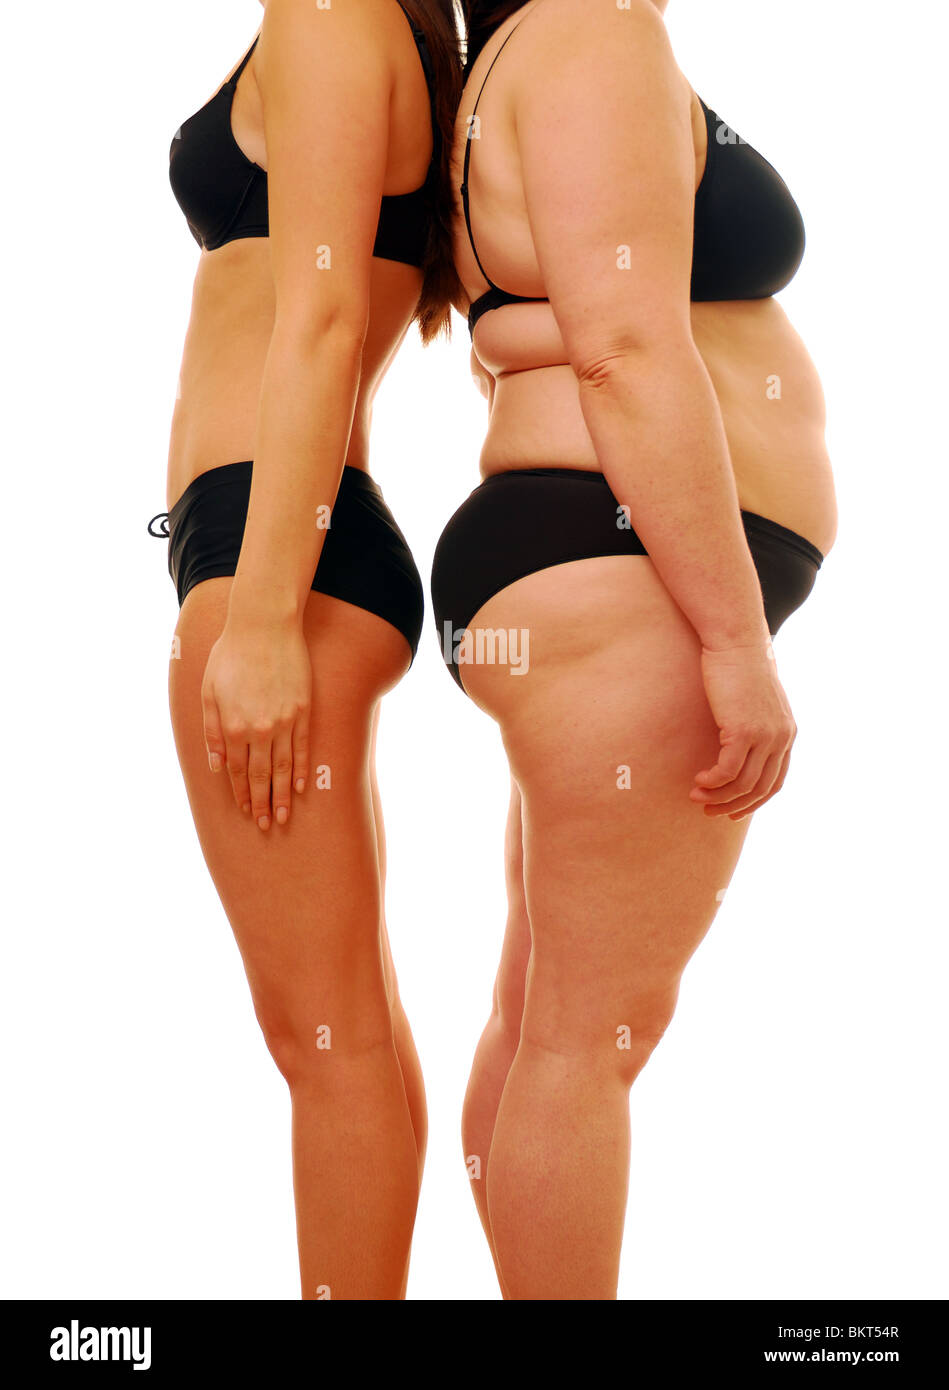 Fat and thin woman Stock Photo